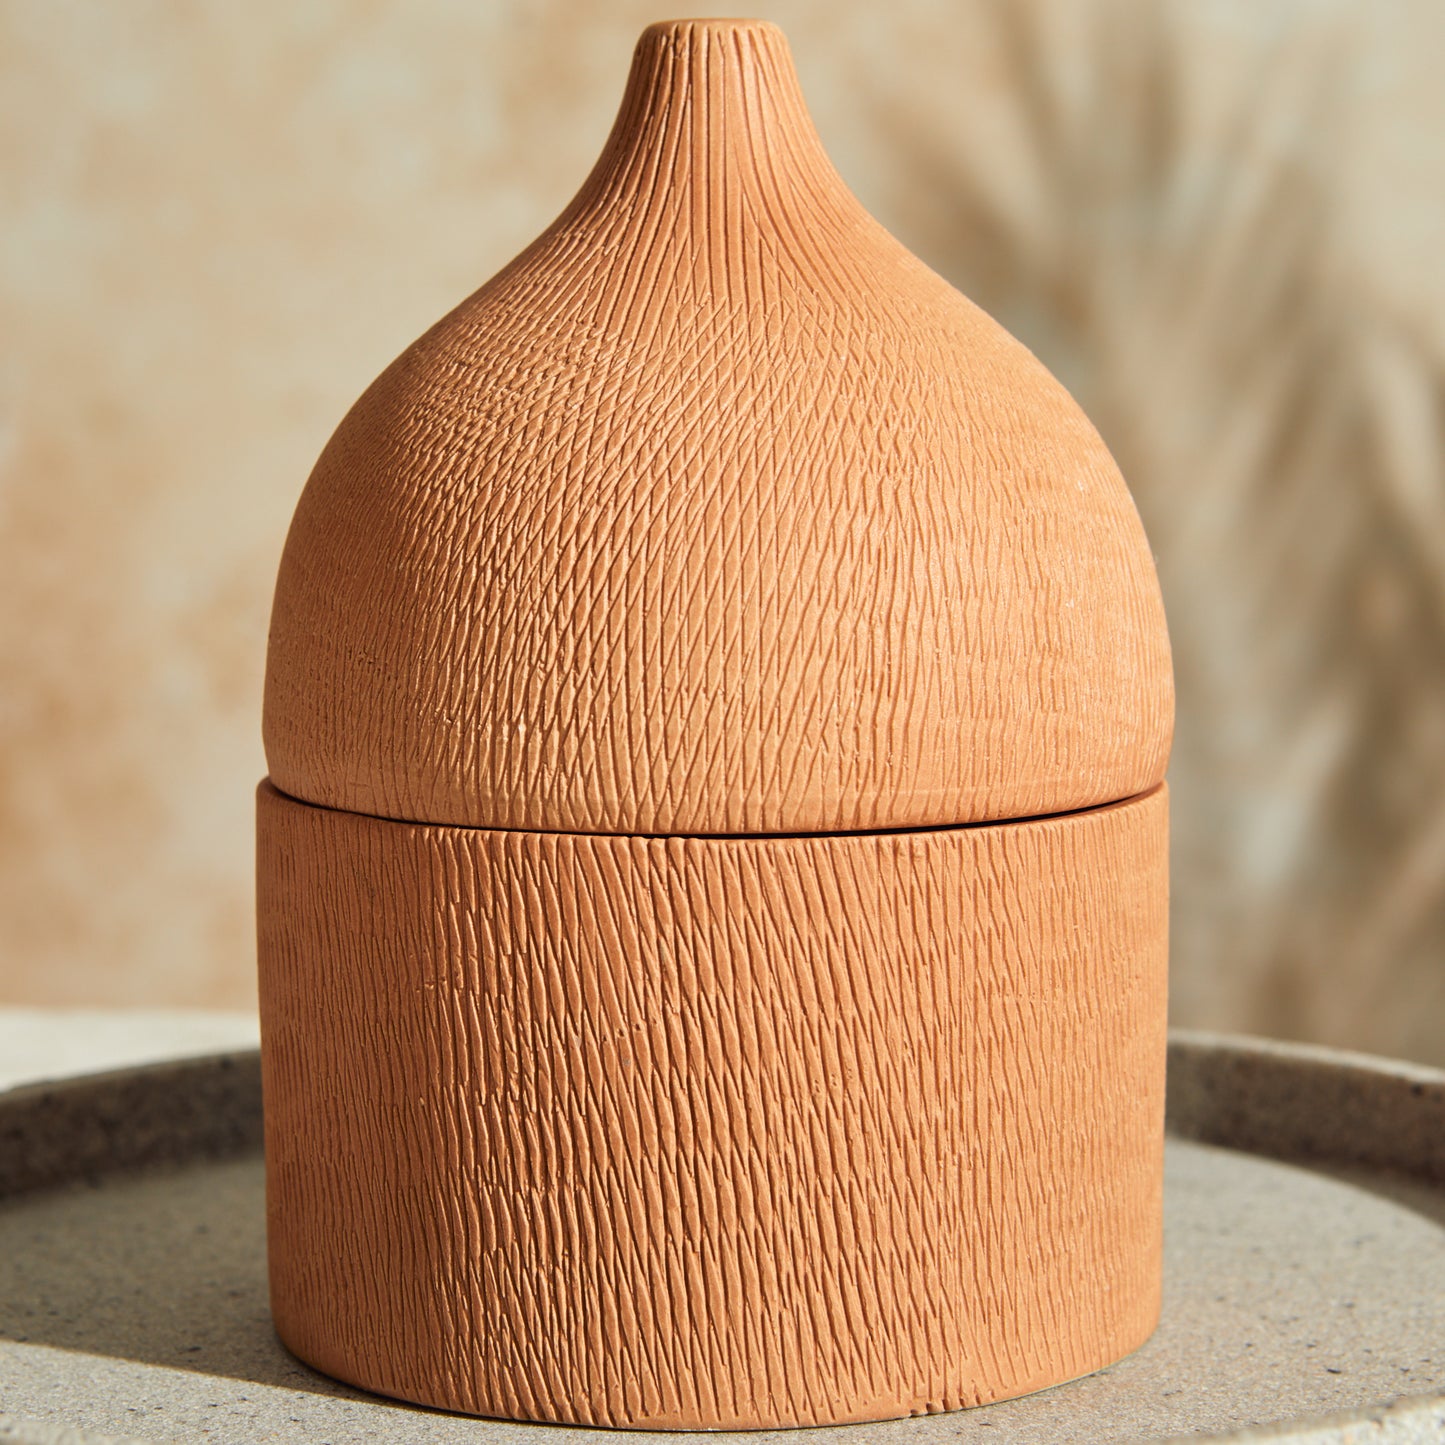 Marrakesh: Rounded Terracotta Candle - Passionfruit & Vanilla